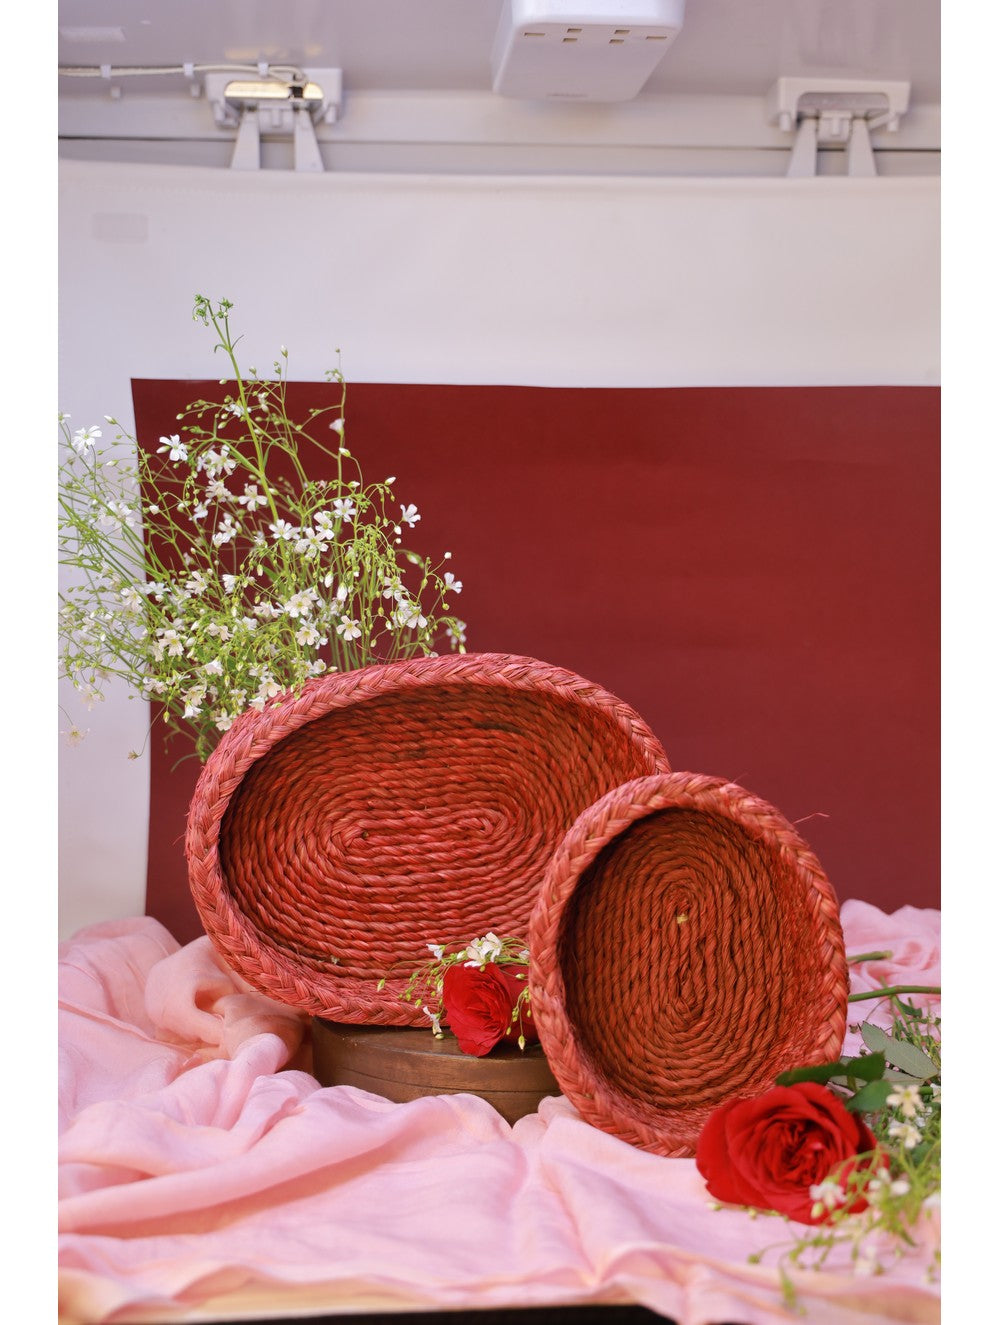 Load image into Gallery viewer, Handcrafted Sabai Grass Utility Baskets (Oval, Red - Set of 2)